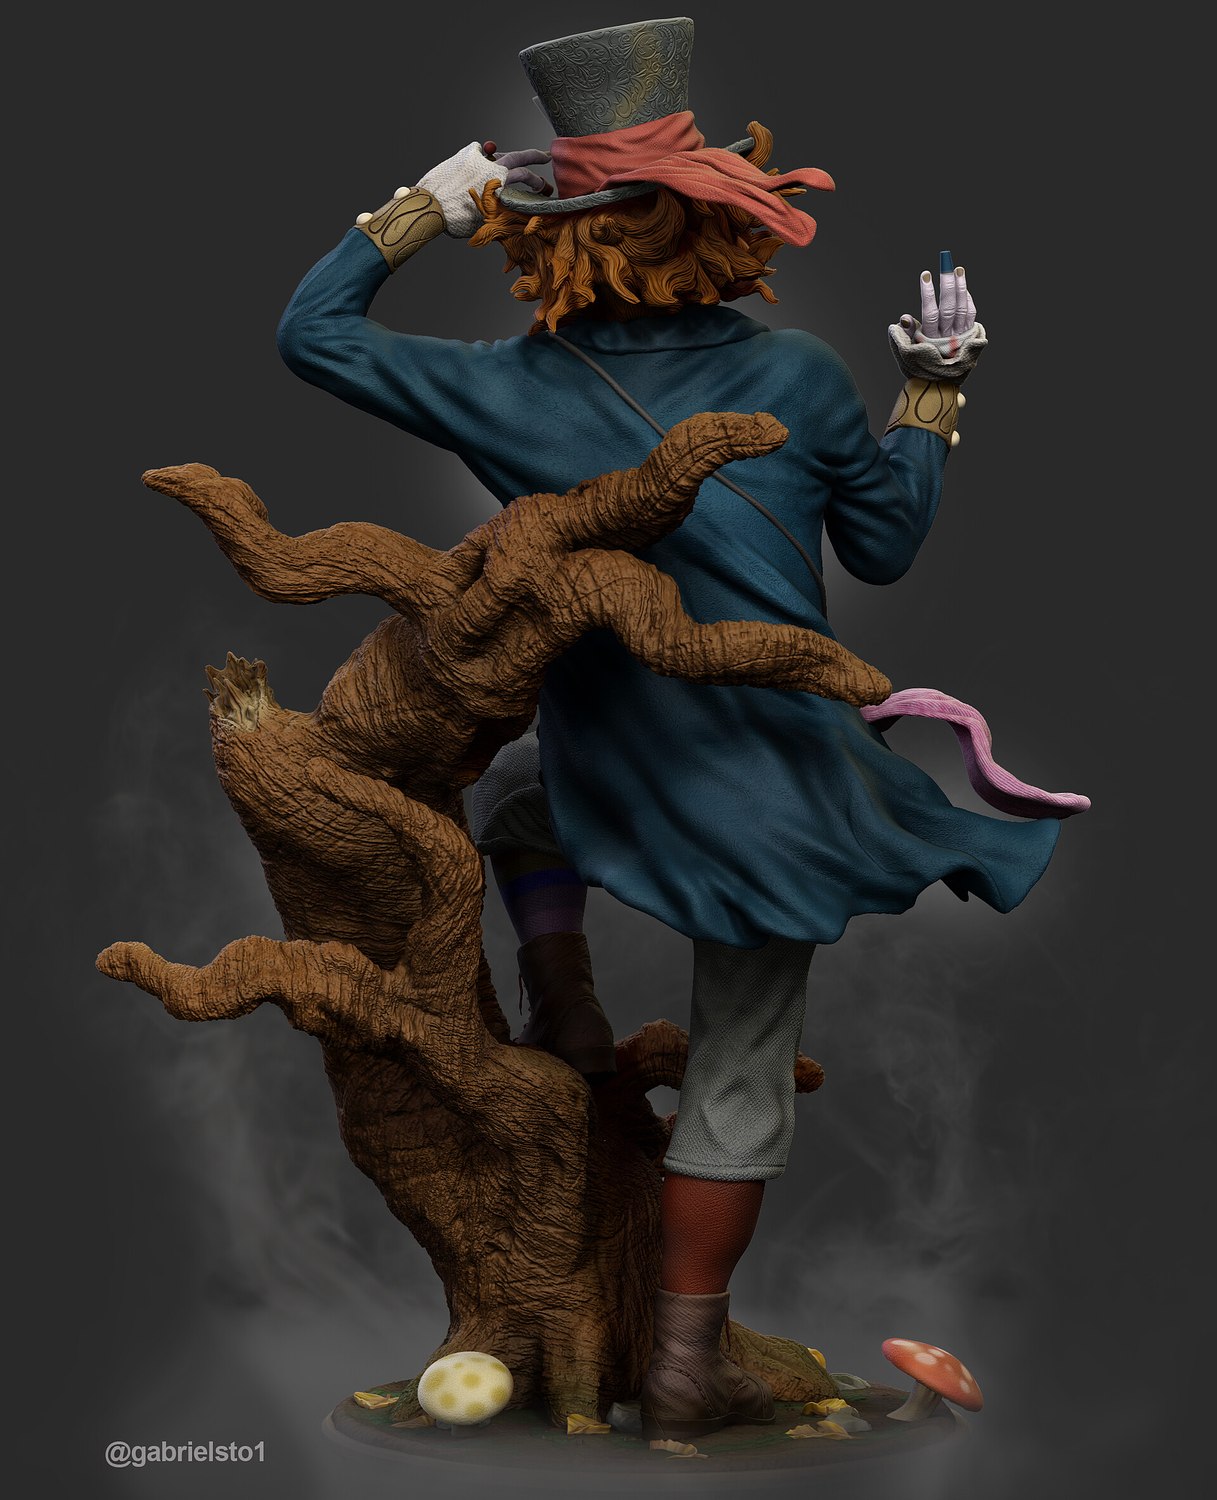 The Mad Hatter From Alice in Wonderland